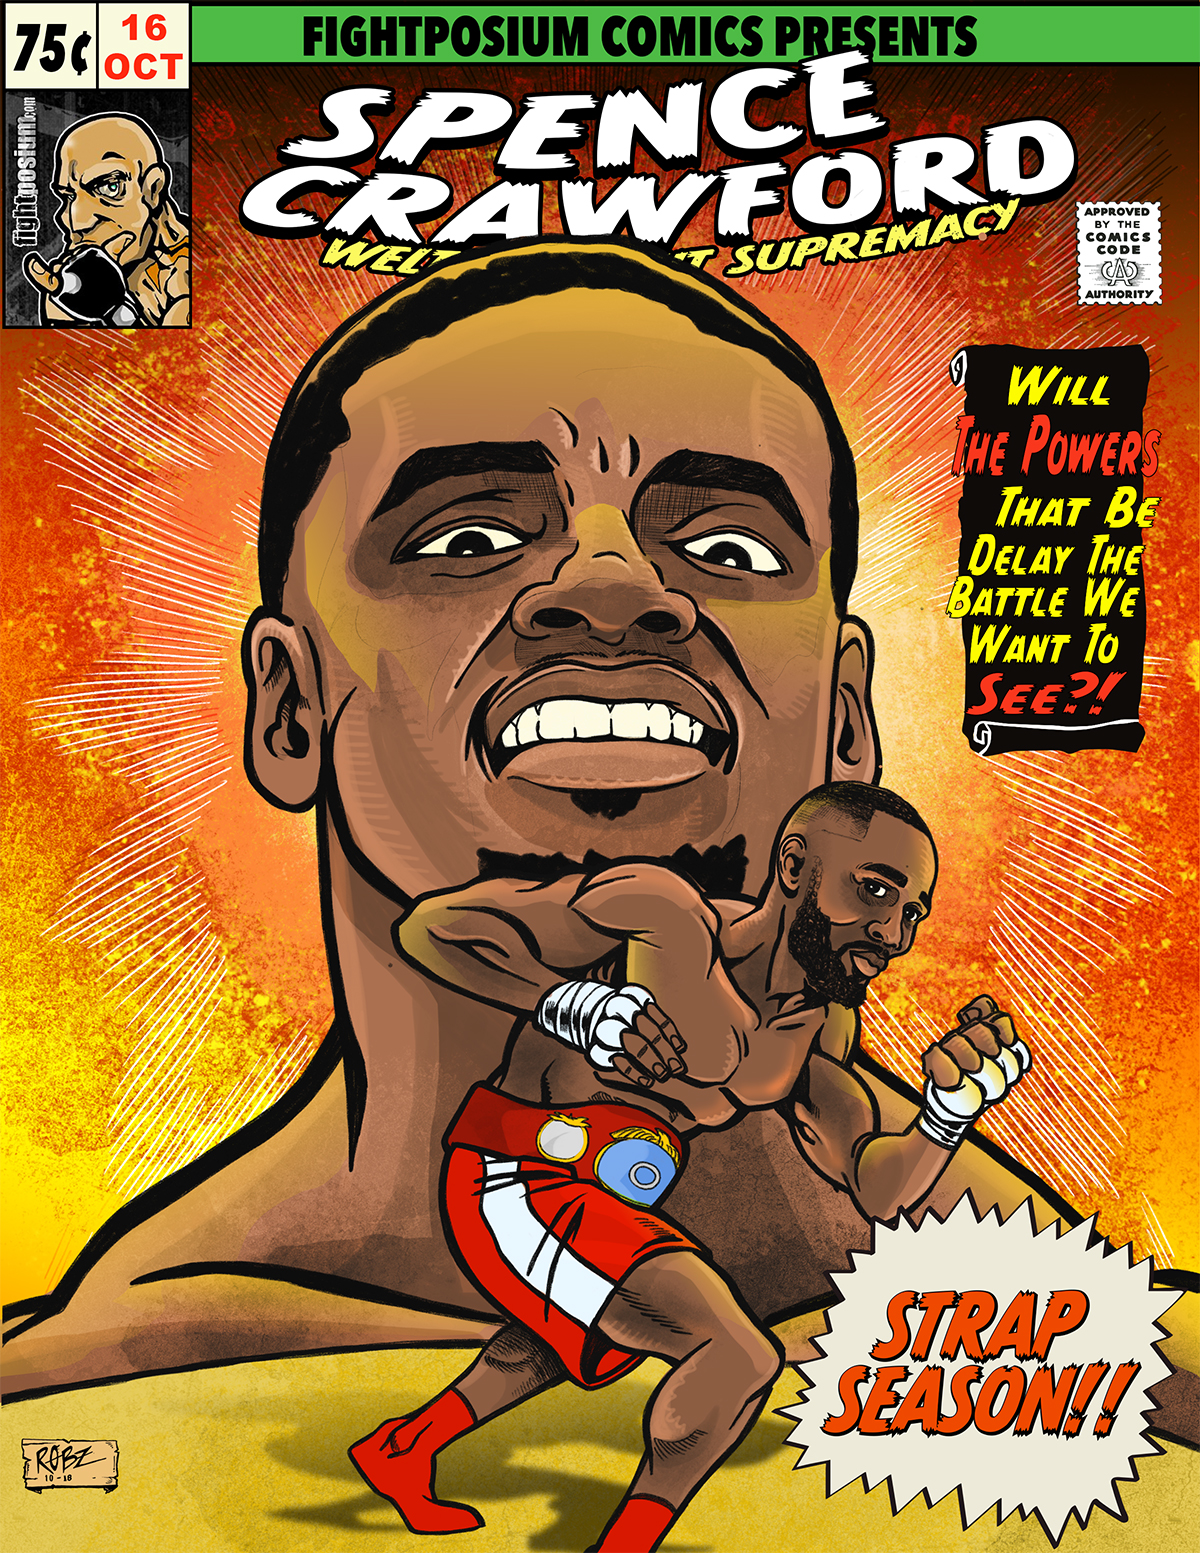 You are currently viewing Spence vs Crawford – Strap Season!!